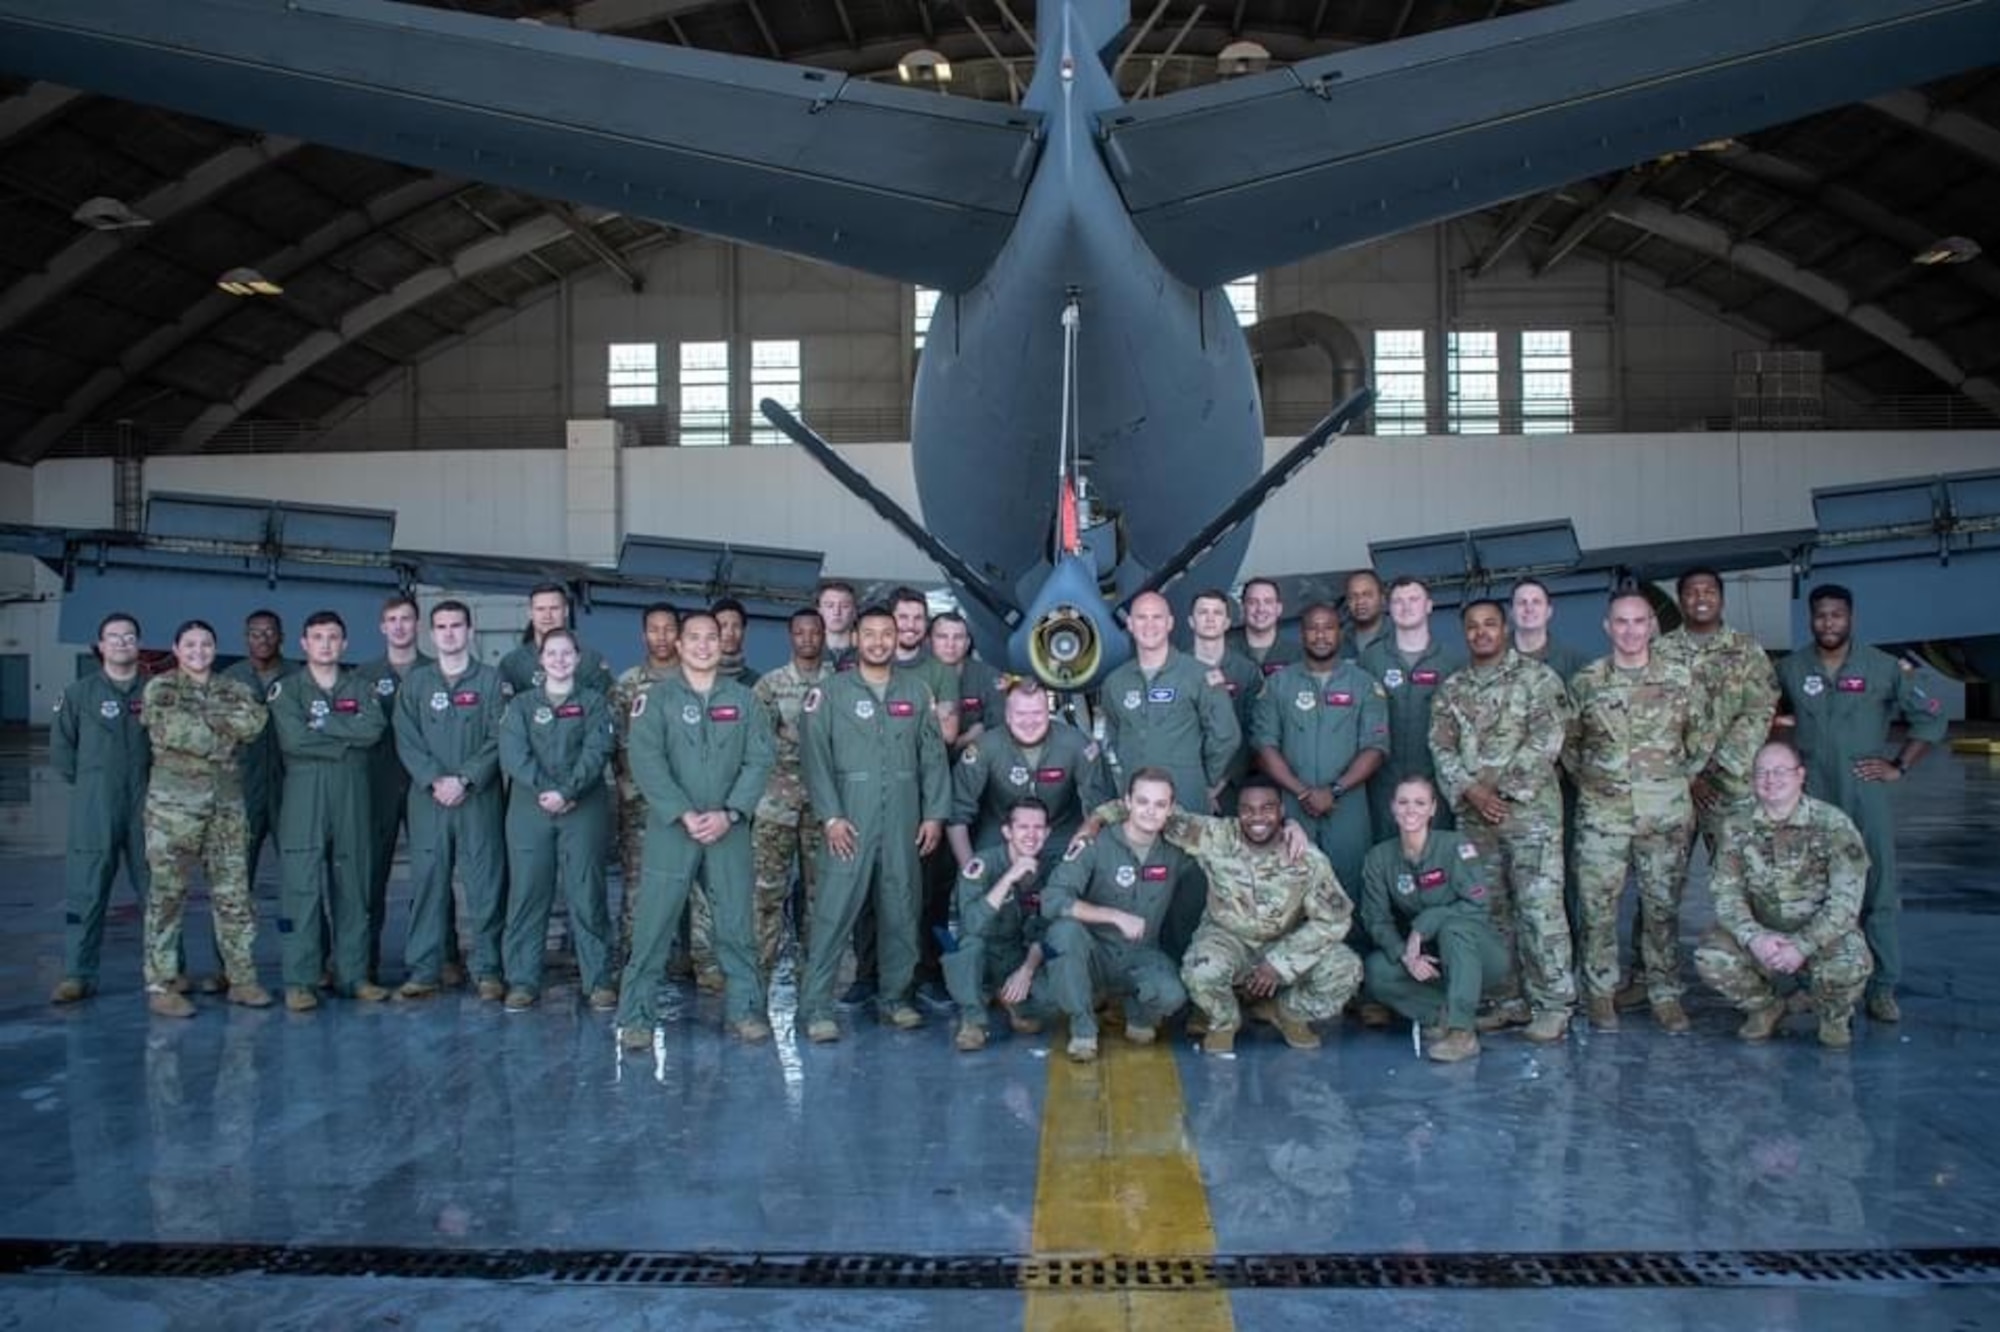 Airmen from the 50th Air Refueling Squadron (ARS) ‘Red Devils’ pose for a photograph under the boom of a KC-135 Stratotanker aircraft at MacDill Air Force Base, Florida. The 50th ARS recently won the 2020 Senior Master Sgt. Albert Evans Award, recognizing them as the best air refueling section in the Air Force. (Courtesy photograph)